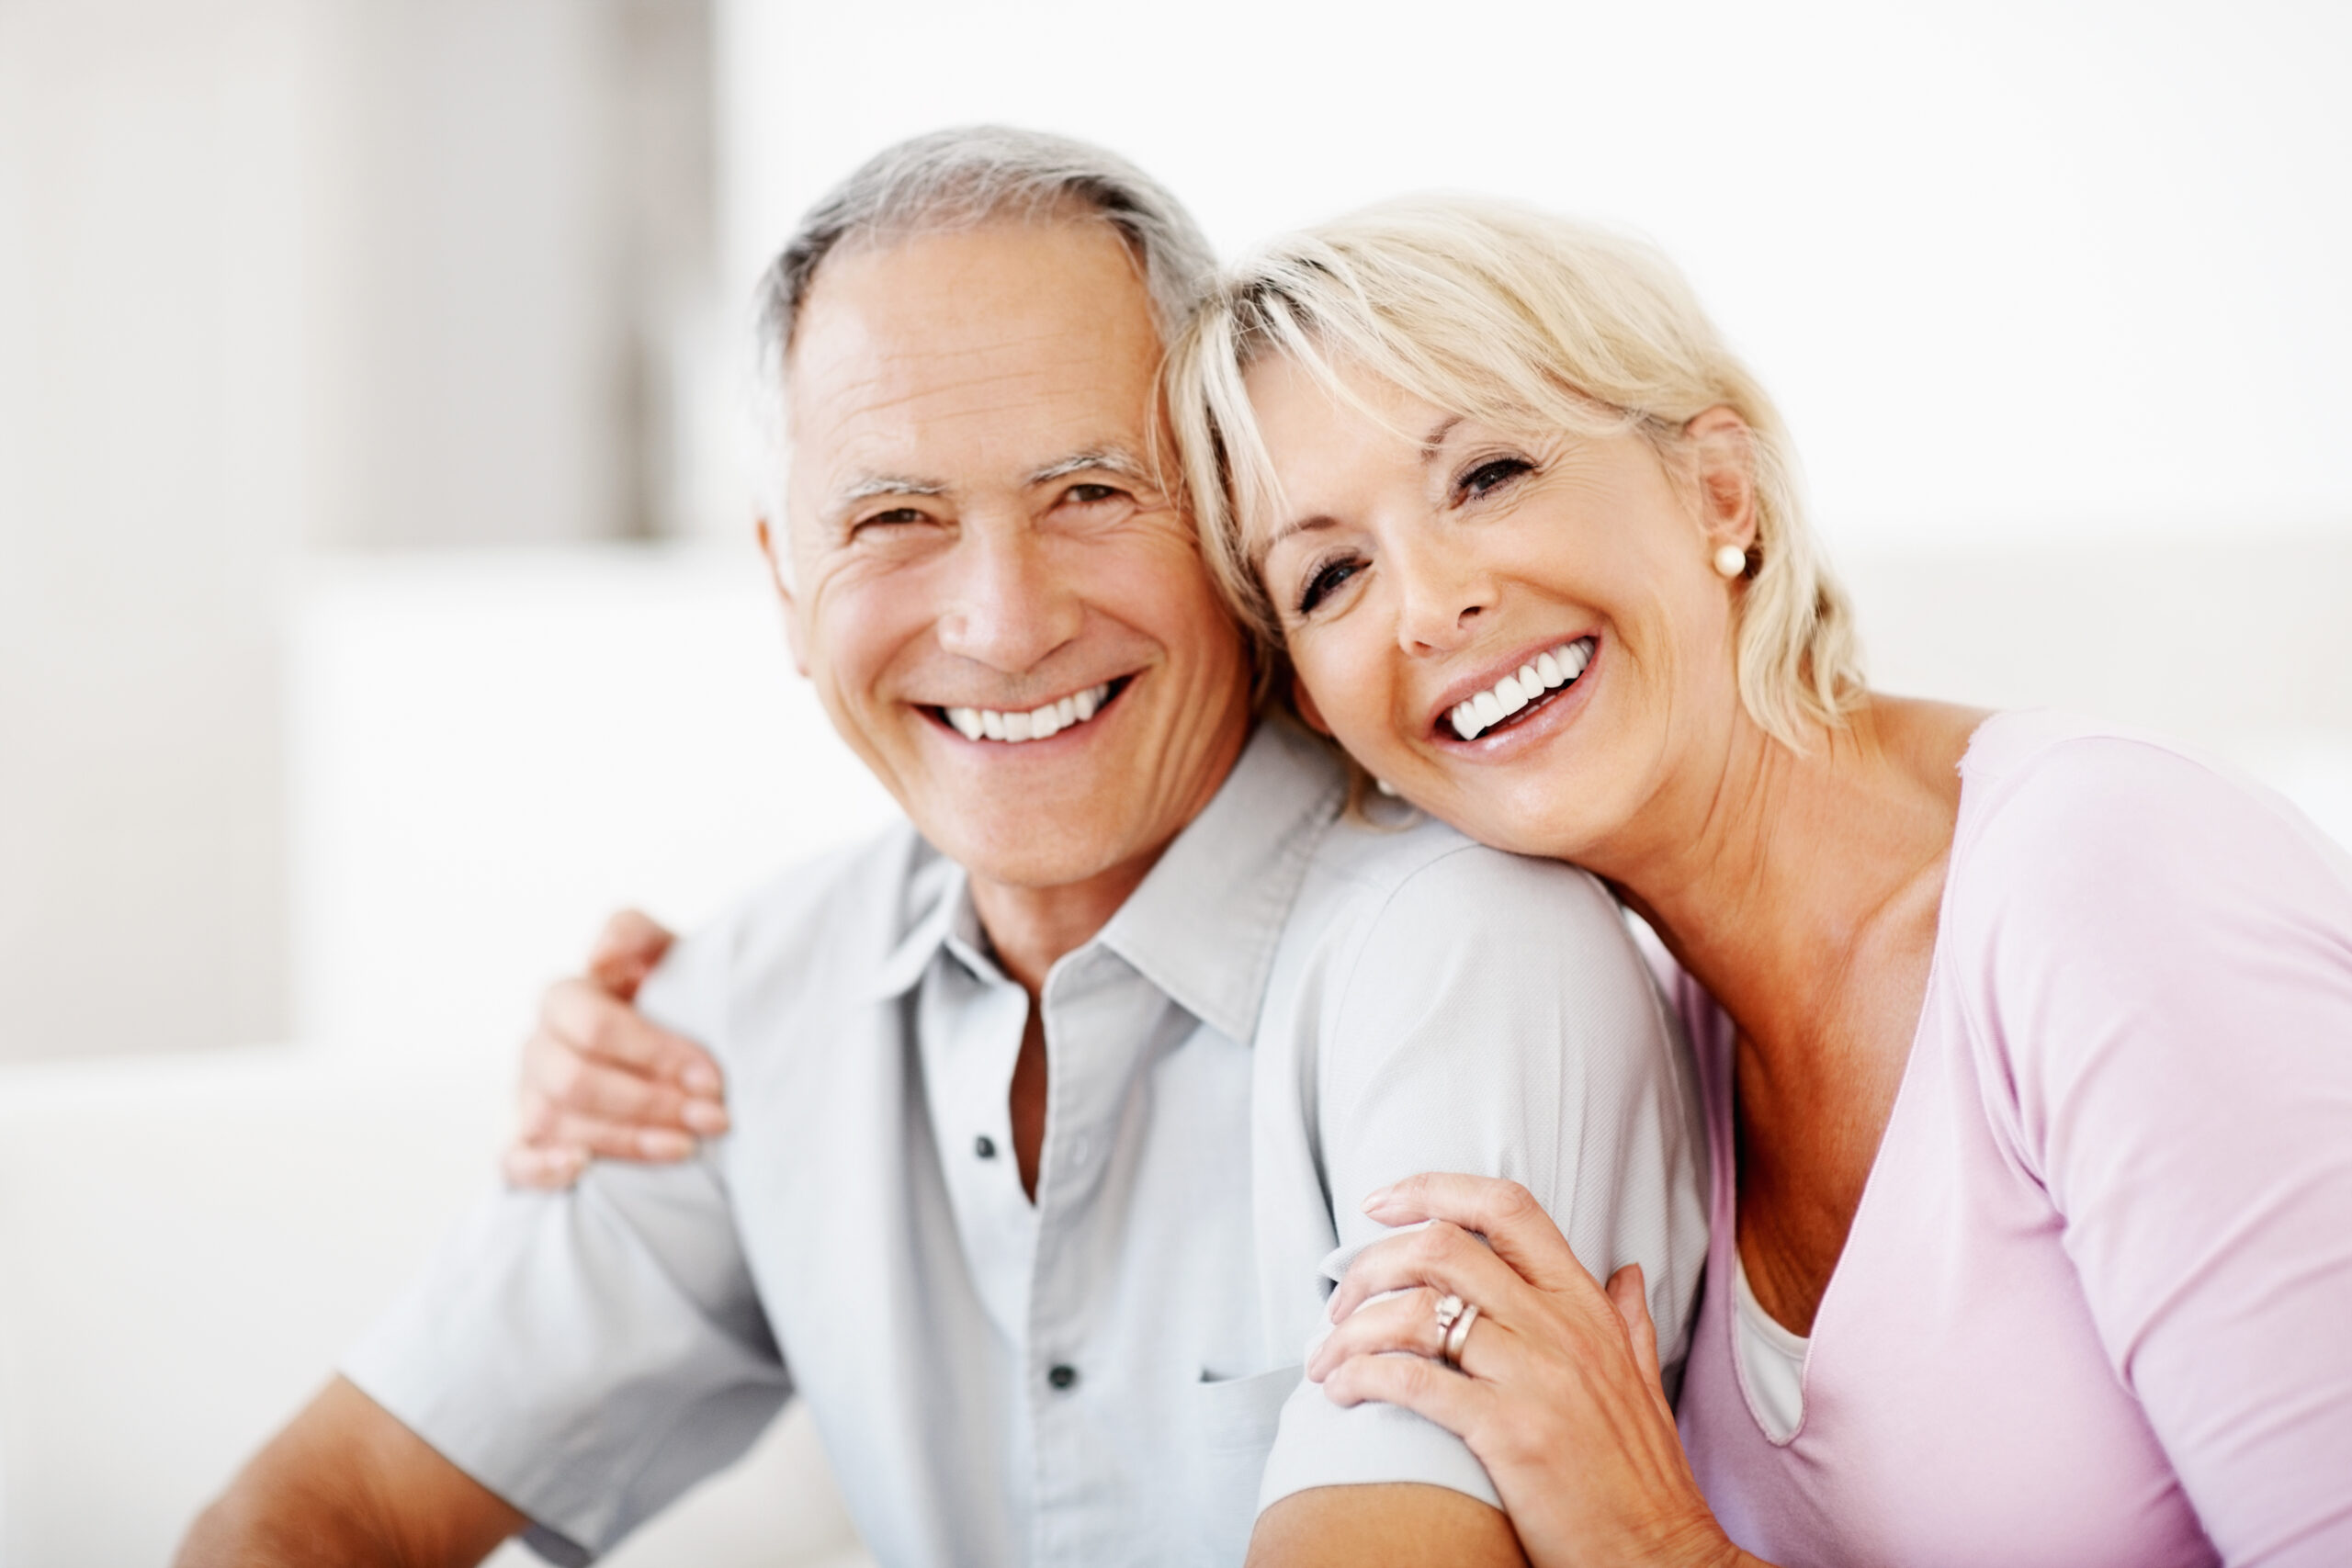 Smiling Your Way to Confidence with Avenida Denture Clinic